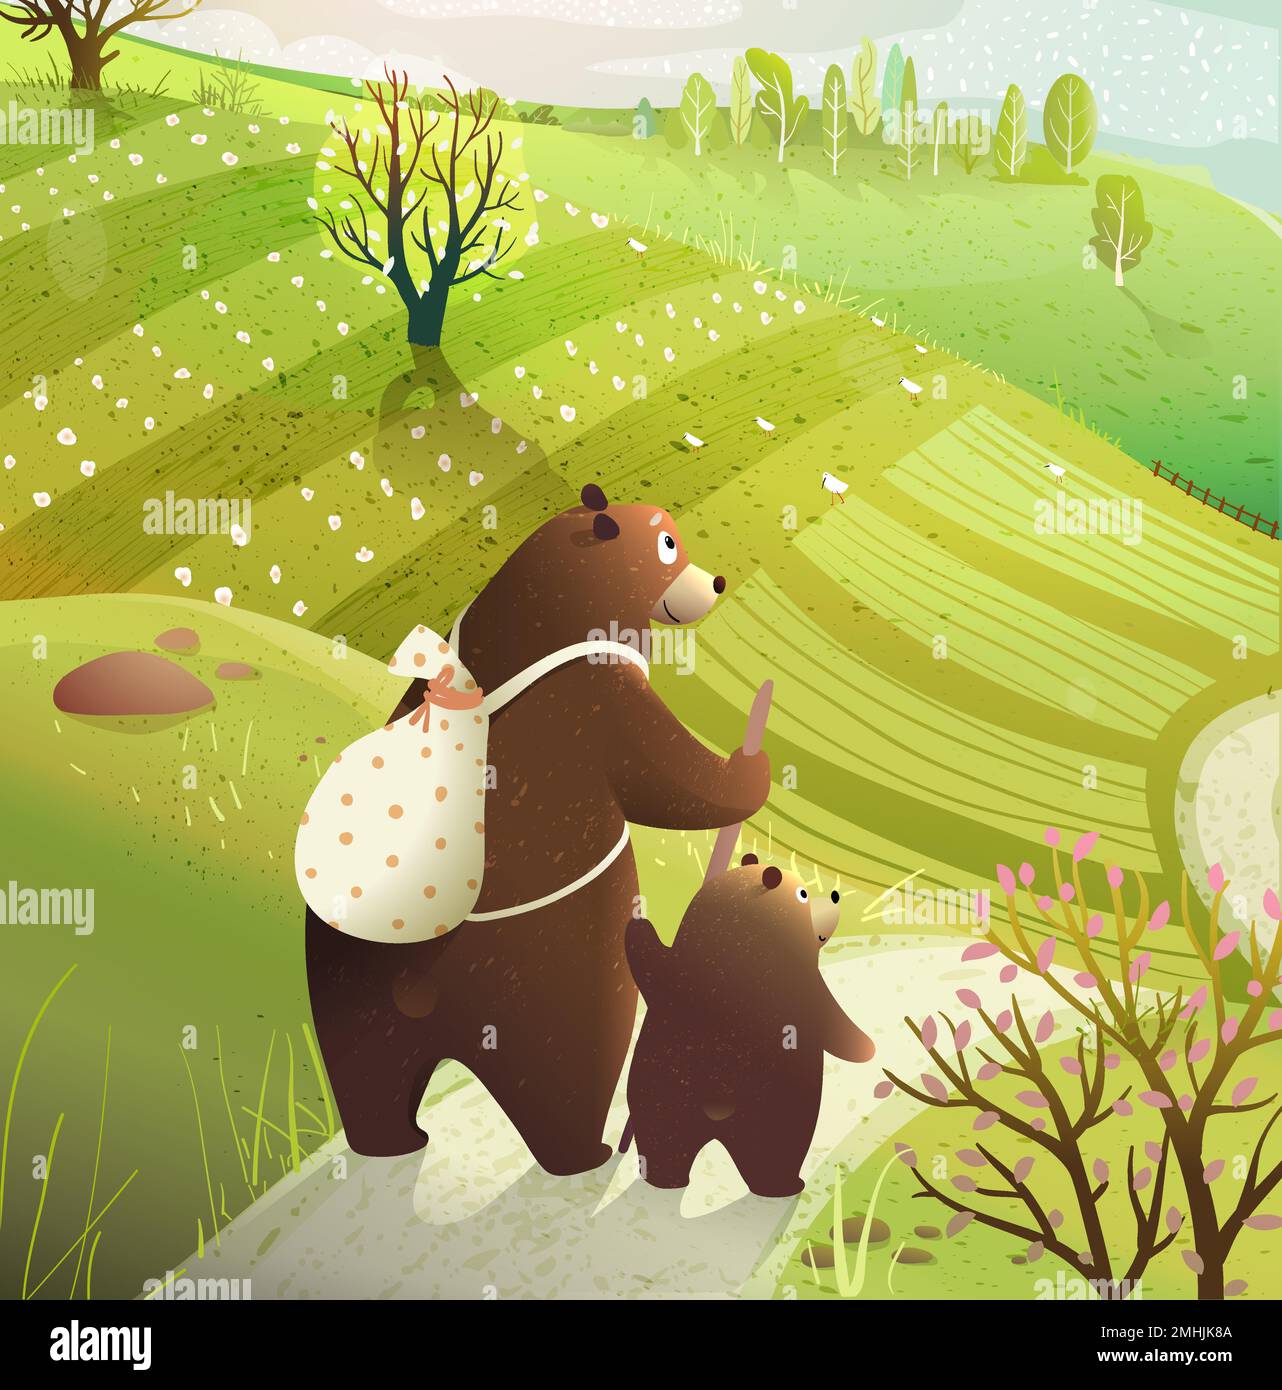 Bears Travelling in Rustic Wild Scenery Landscape Stock Vector